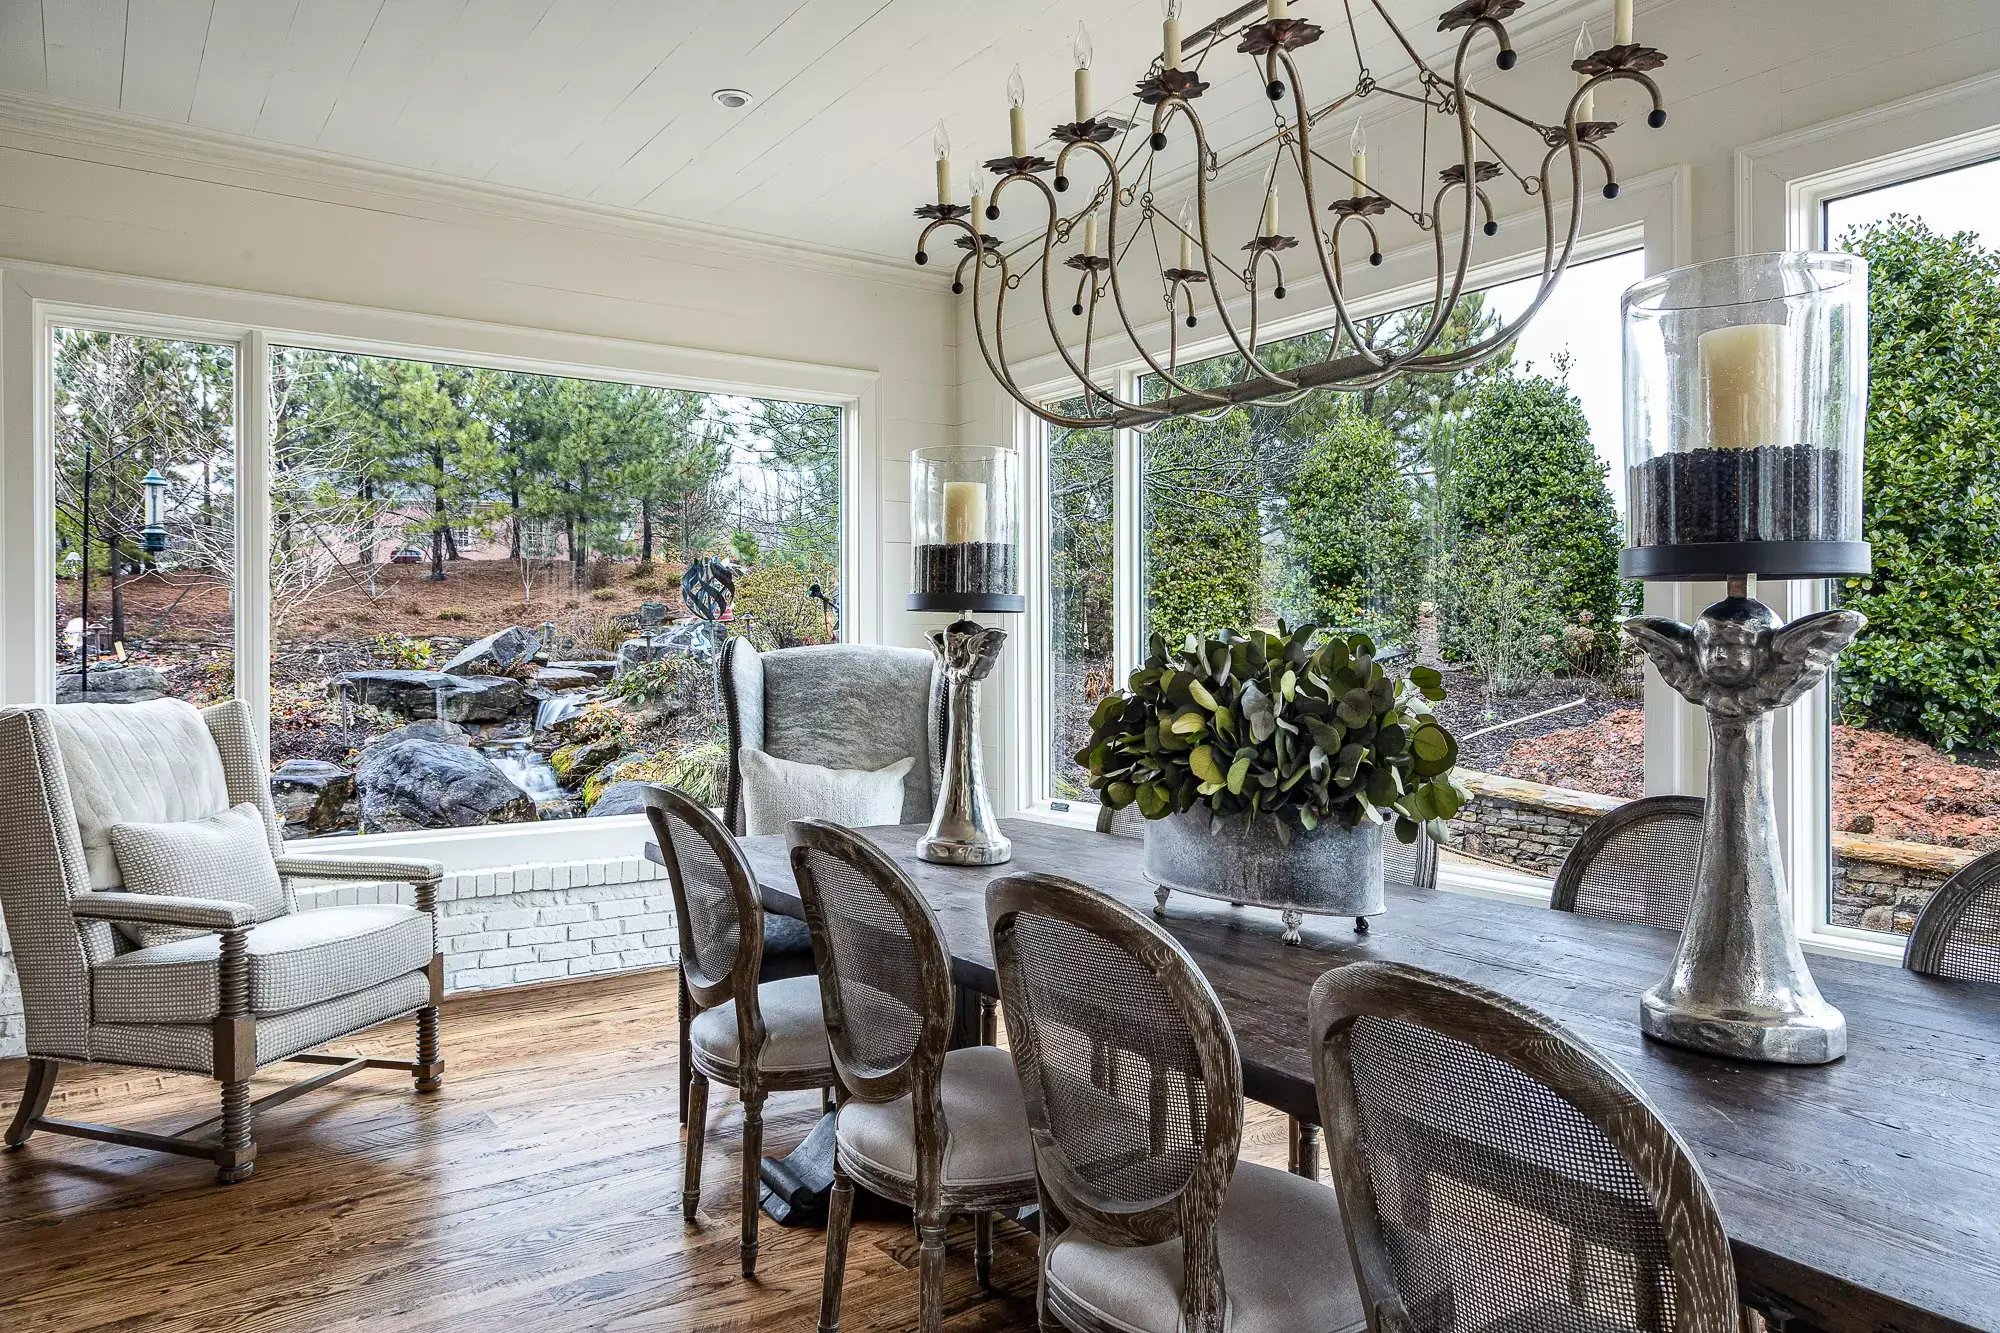 Bright dining area with elegant decor, overlooking a tranquil garden with a water feature